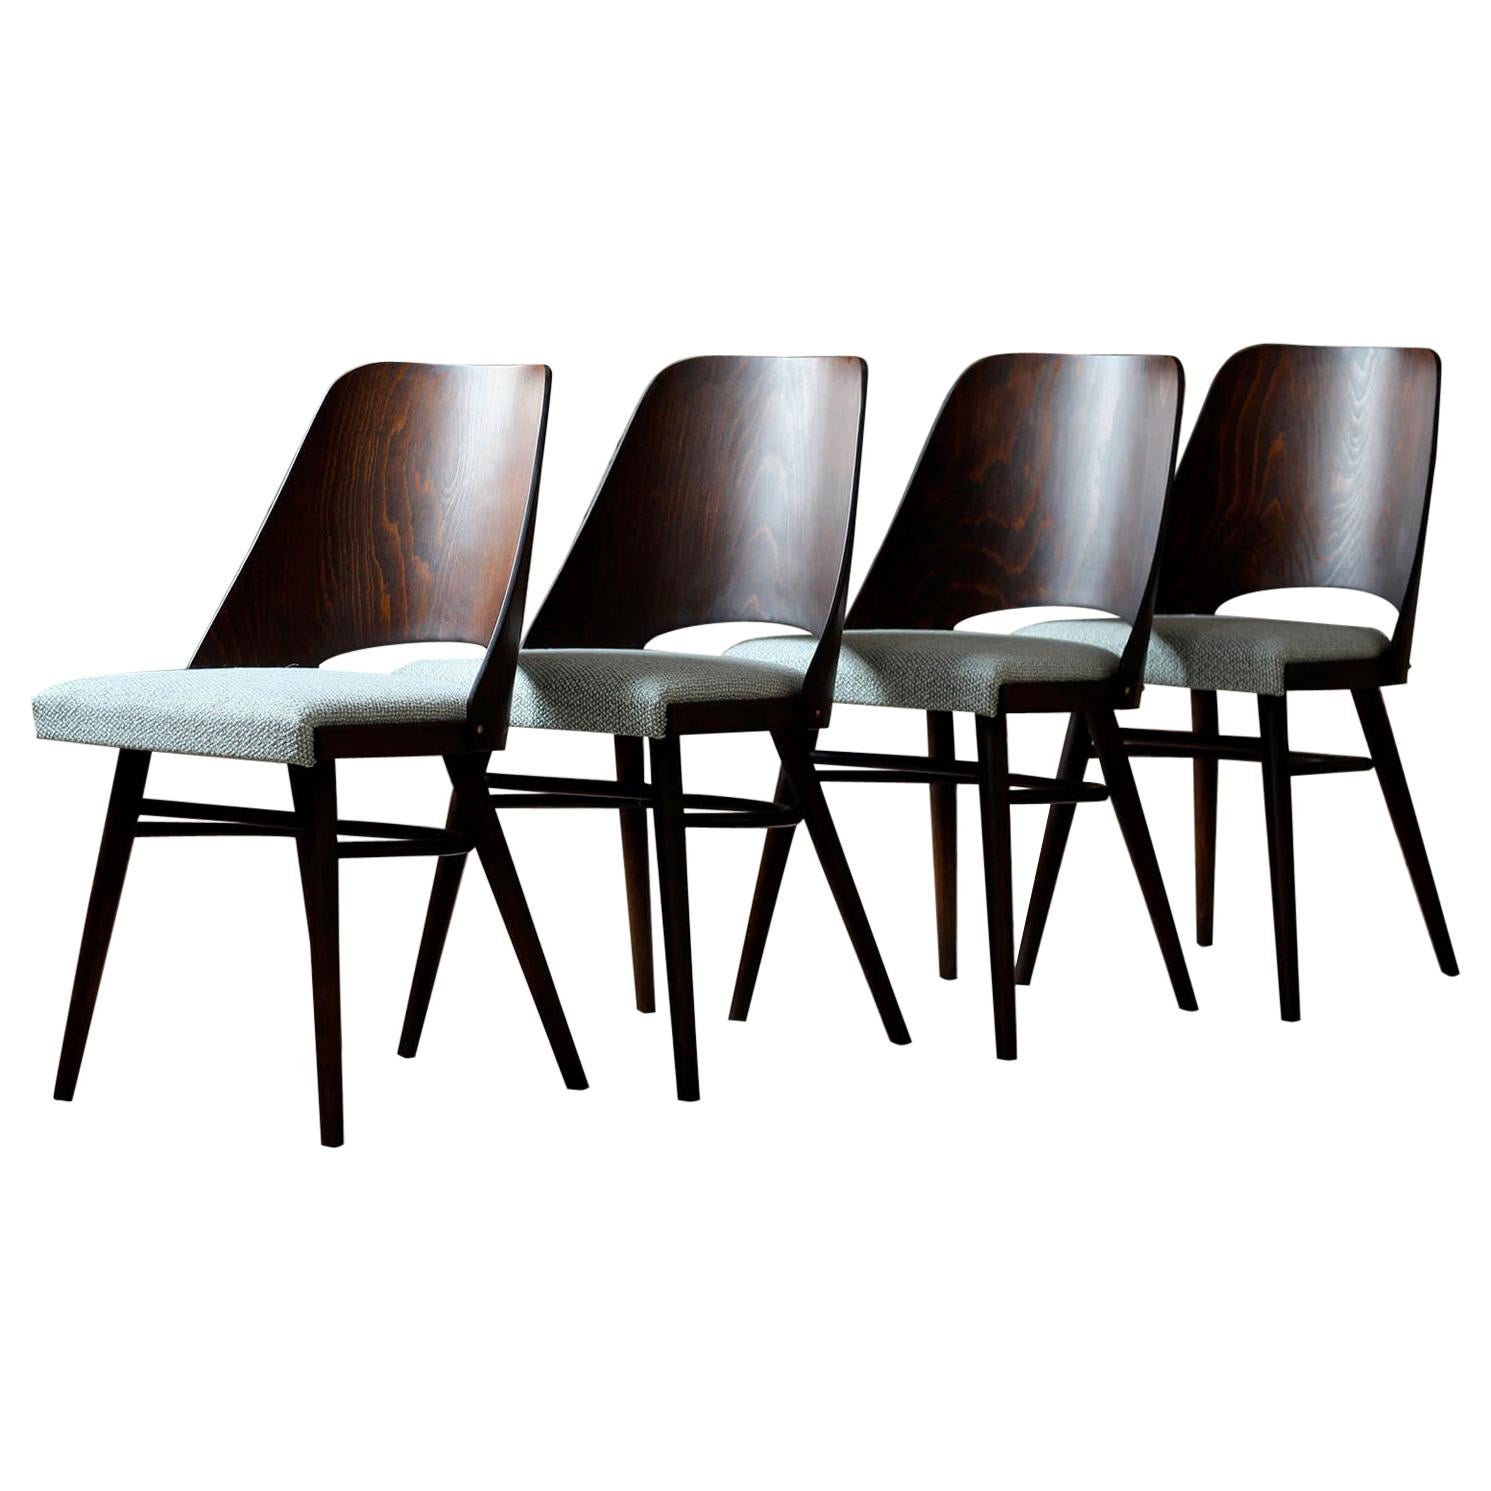 Set of 4 Dining Chairs by R. Hofman for Ton, Model 514, New Sahco Upholstery For Sale